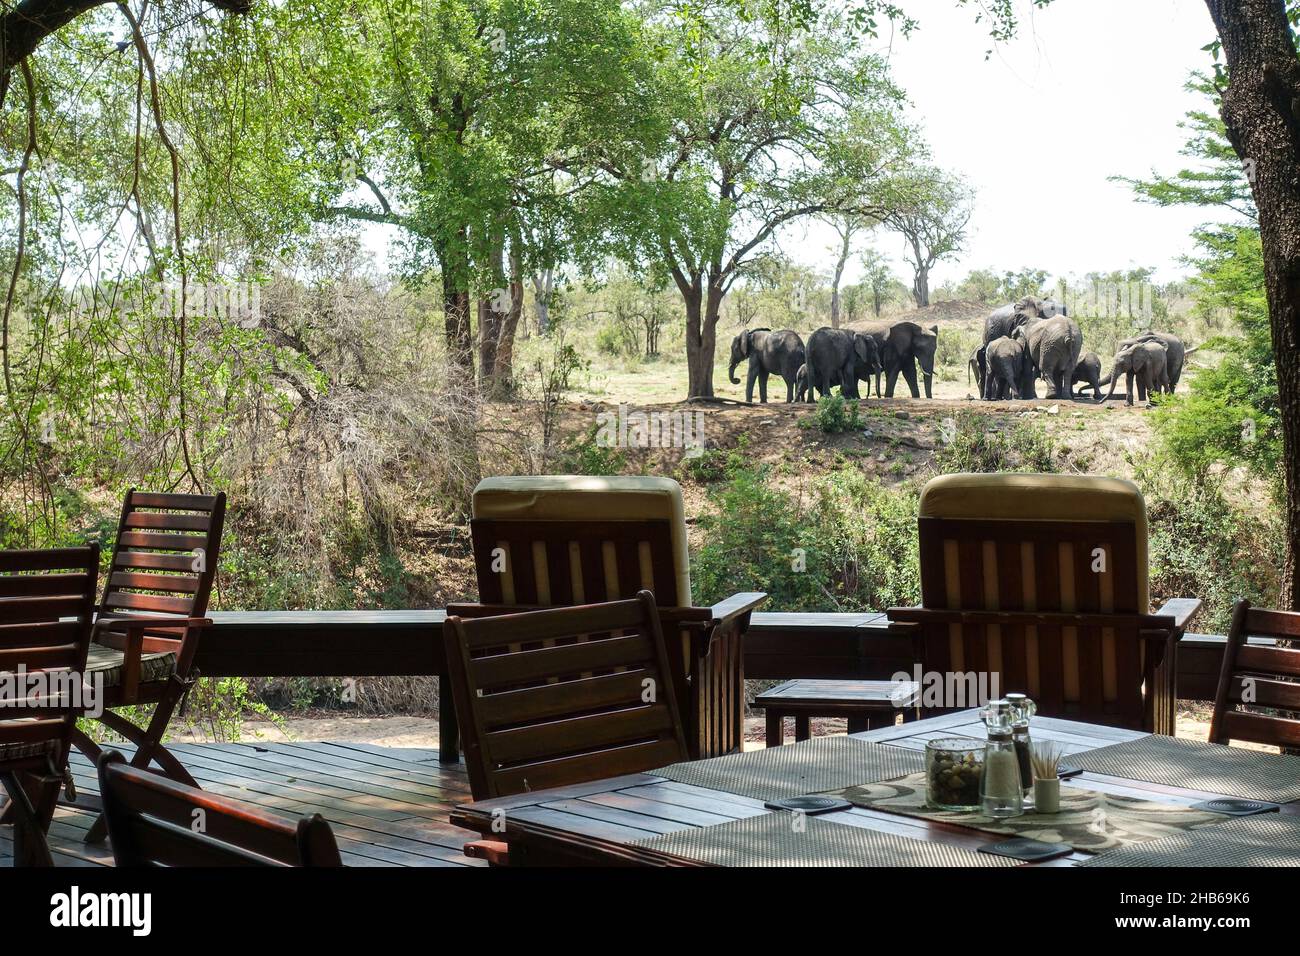 Luxury lodge table and elephants at a waterhole in the Kruger National Park, South Africa Stock Photo